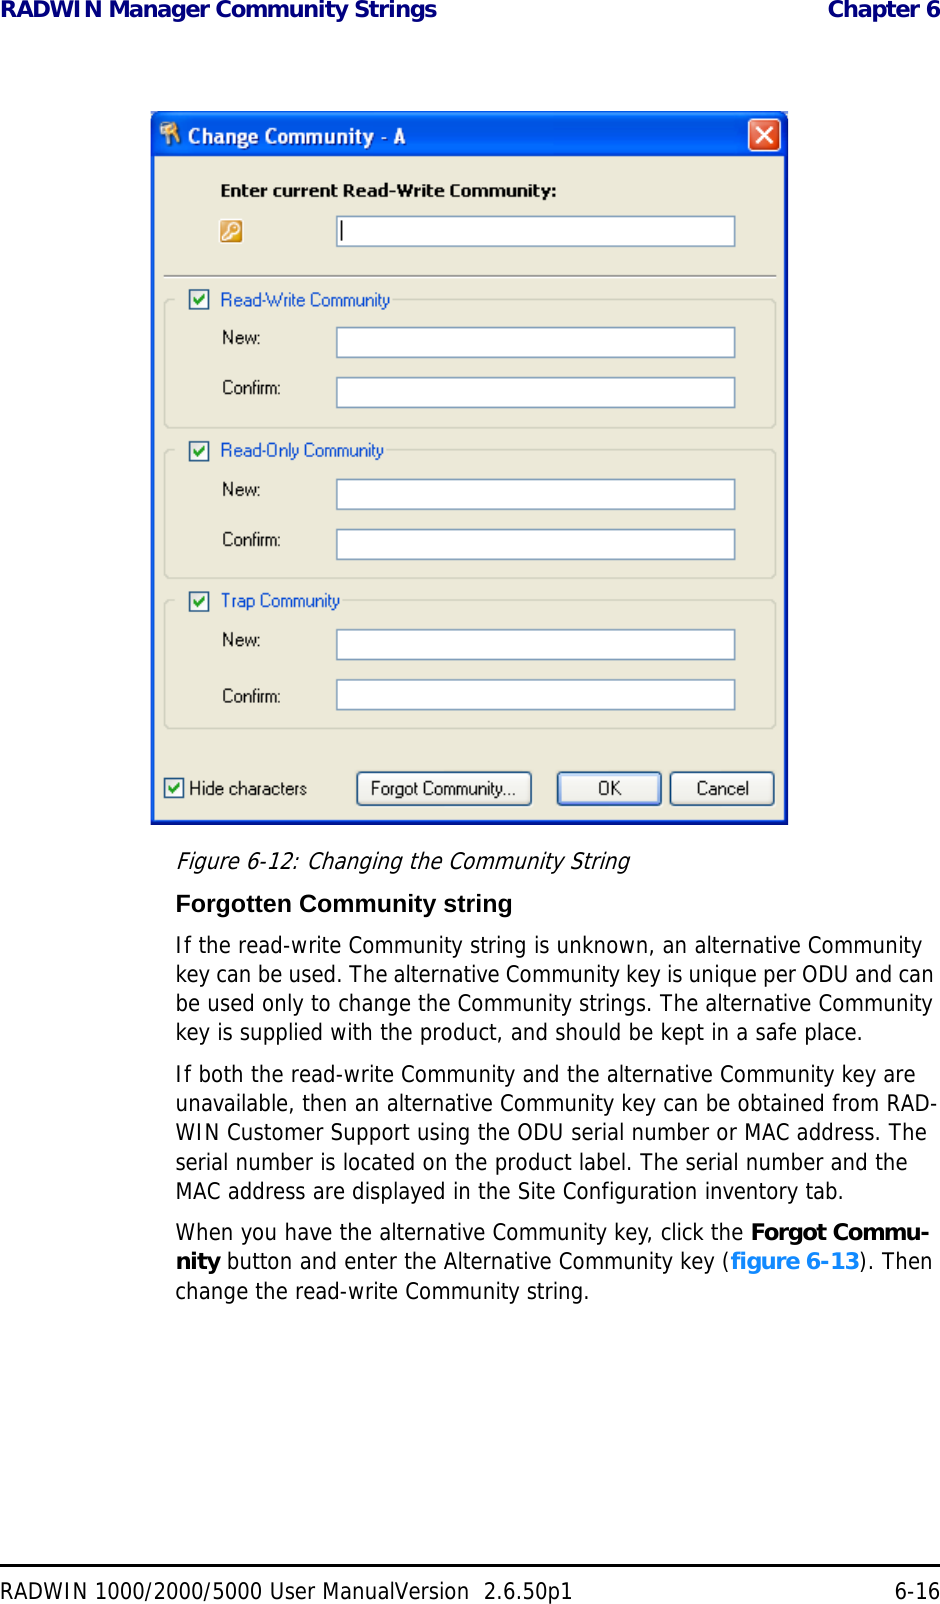 RADWIN Manager Community Strings  Chapter 6RADWIN 1000/2000/5000 User ManualVersion  2.6.50p1 6-16Figure 6-12: Changing the Community StringForgotten Community stringIf the read-write Community string is unknown, an alternative Community key can be used. The alternative Community key is unique per ODU and can be used only to change the Community strings. The alternative Community key is supplied with the product, and should be kept in a safe place. If both the read-write Community and the alternative Community key are unavailable, then an alternative Community key can be obtained from RAD-WIN Customer Support using the ODU serial number or MAC address. The serial number is located on the product label. The serial number and the MAC address are displayed in the Site Configuration inventory tab.When you have the alternative Community key, click the Forgot Commu-nity button and enter the Alternative Community key (figure 6-13). Then change the read-write Community string.